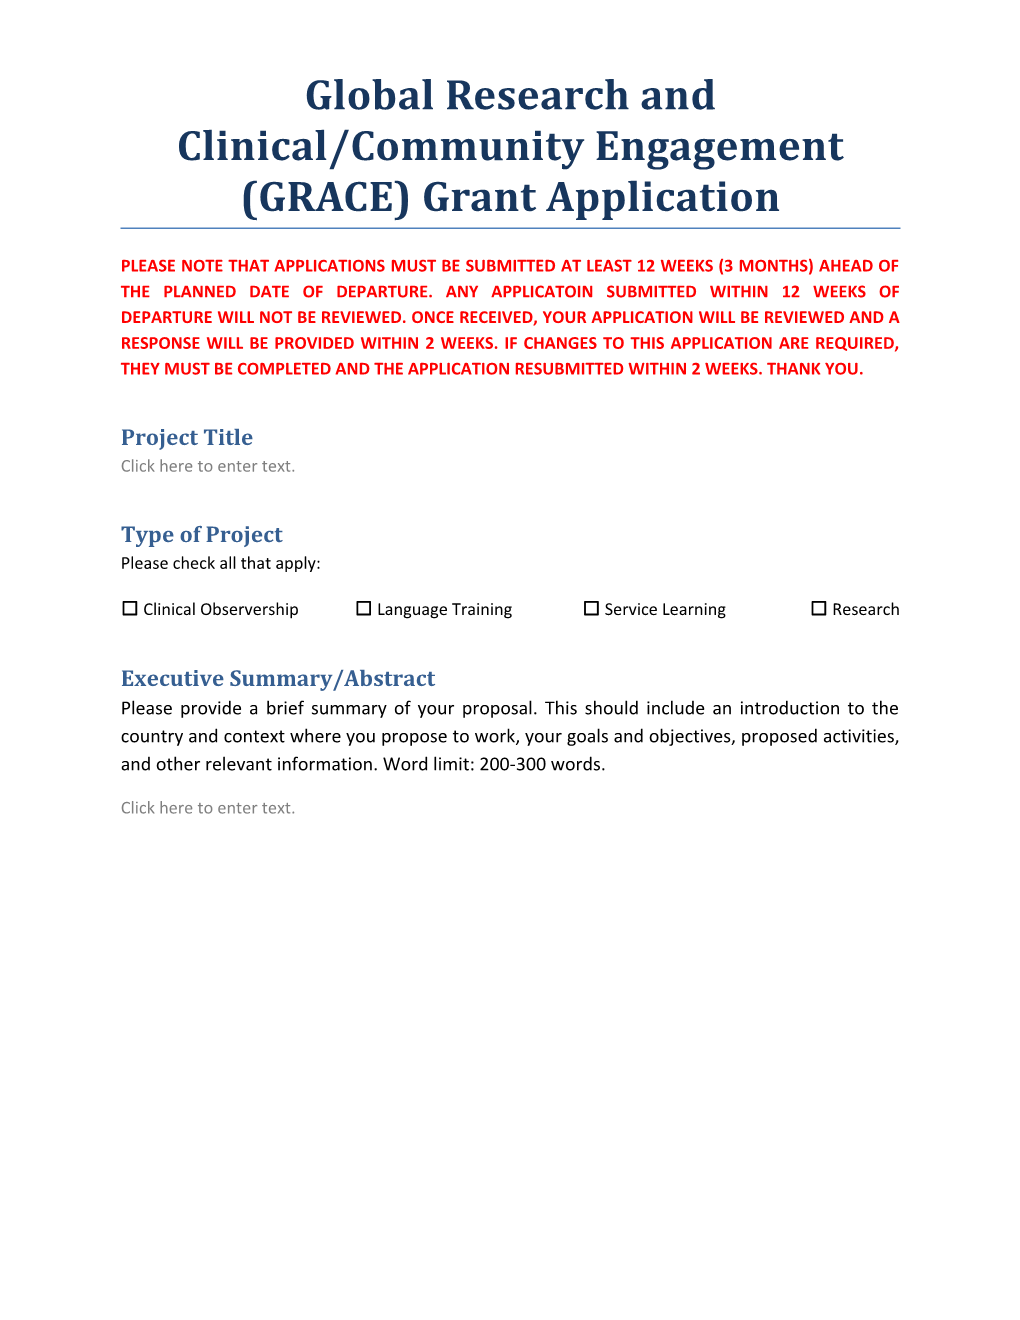 Global Research and Clinical/Community Engagement (GRACE) Grant Application